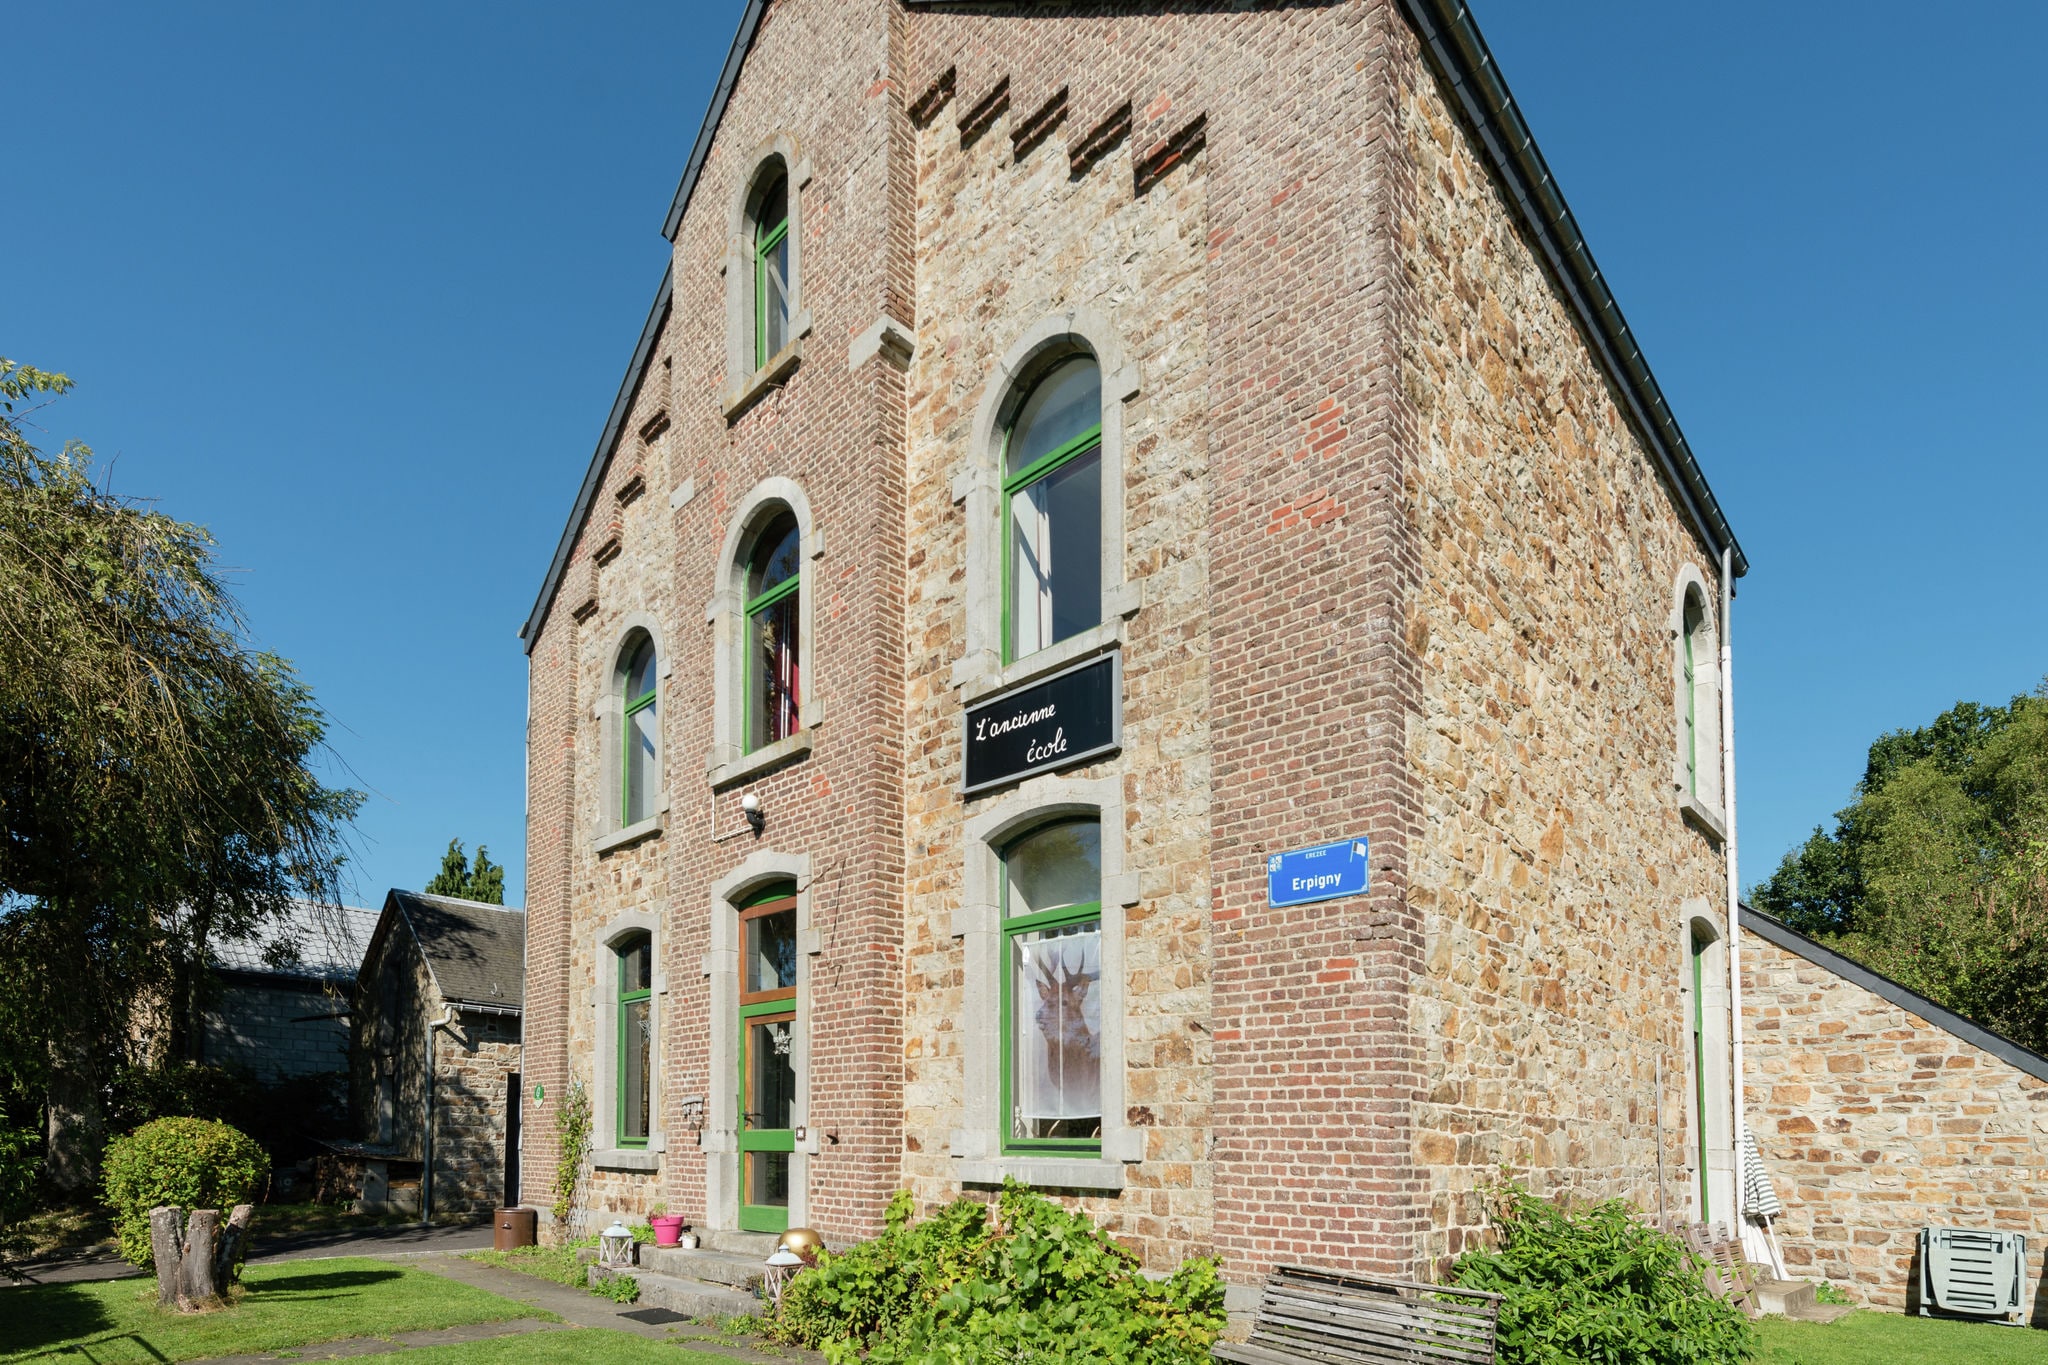 Nice holiday cottage situated in the heart of the Ardennes